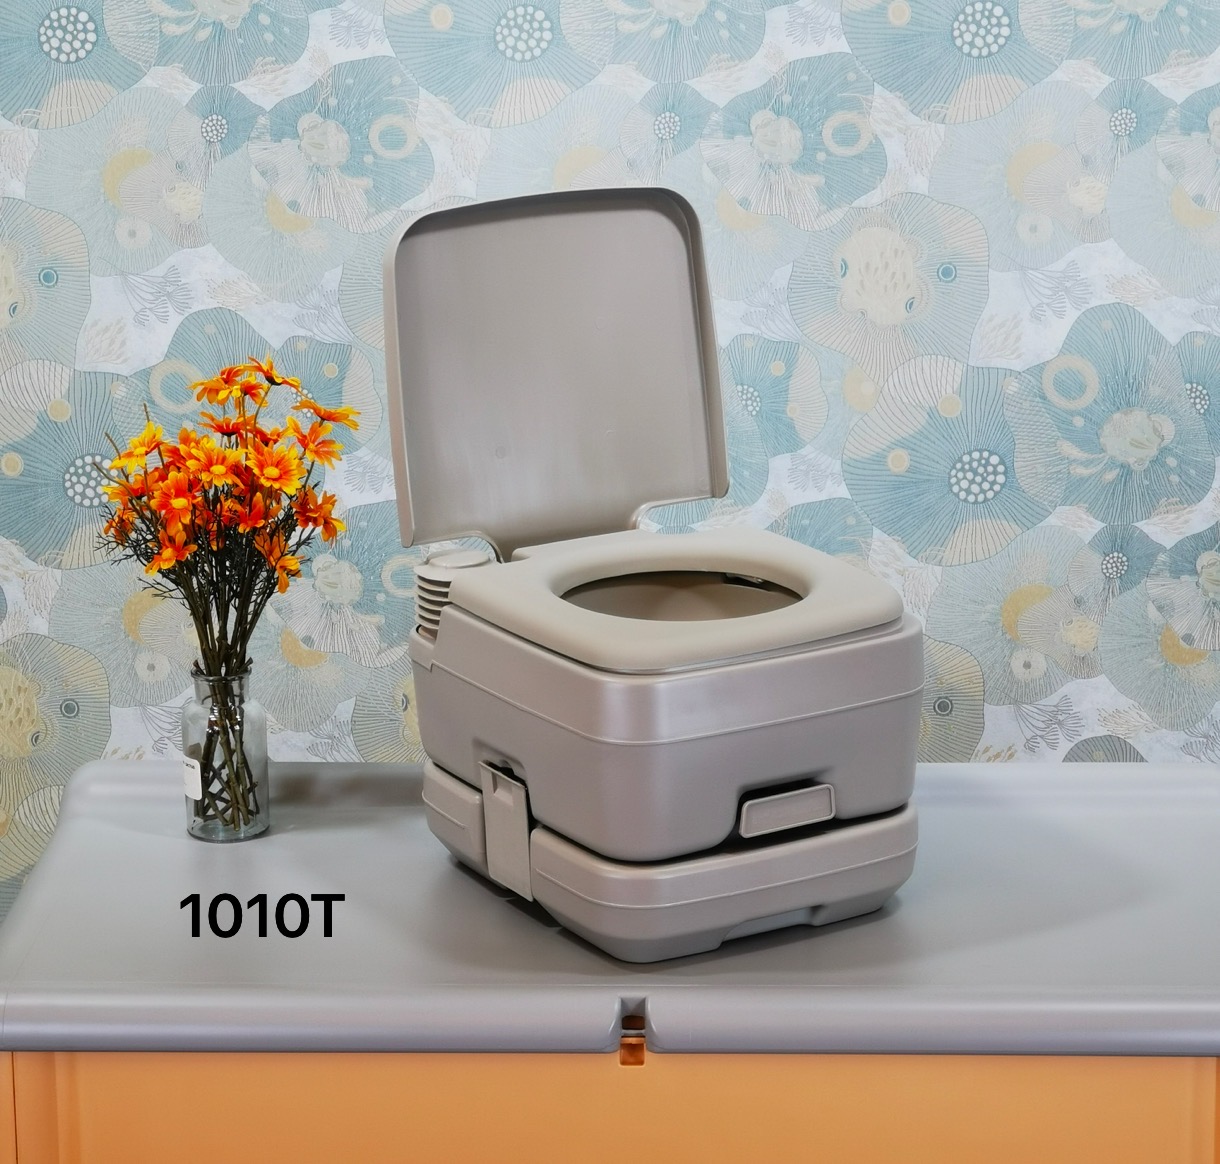 10L portable toilet for camping, RV, boat